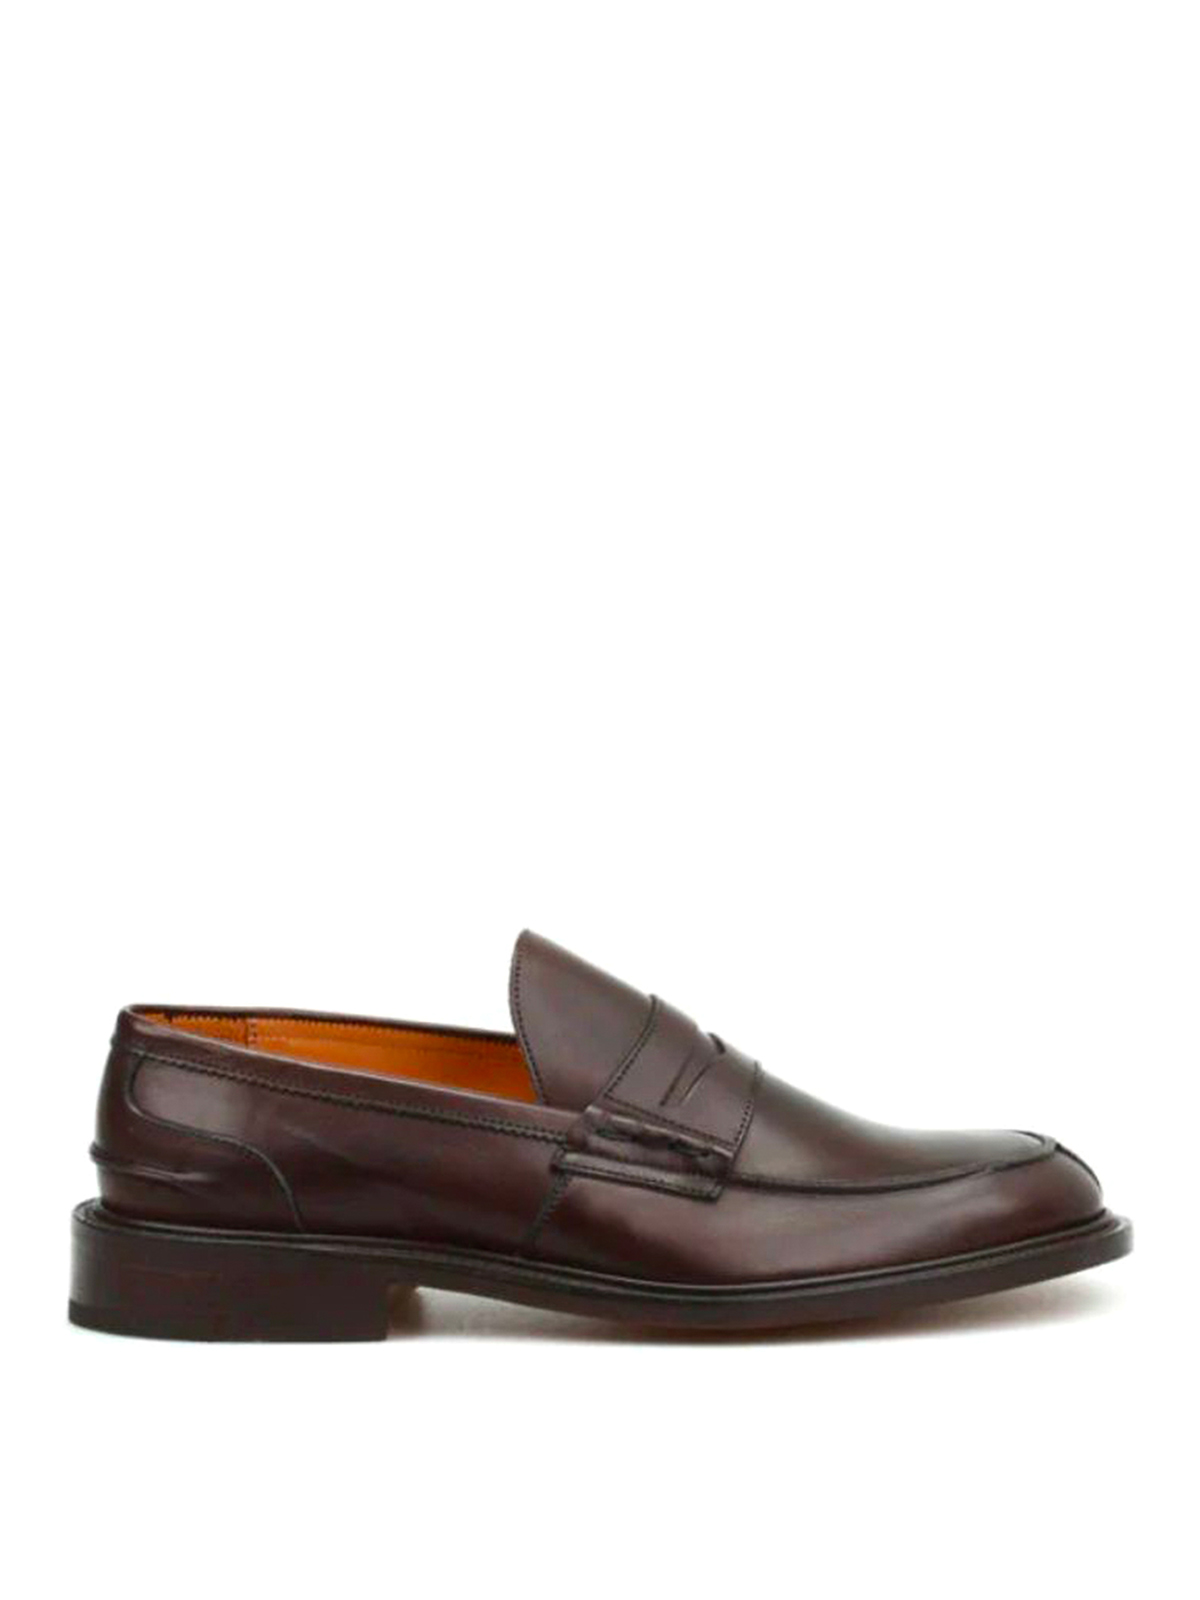 TRICKER'S JAMES LOAFERS